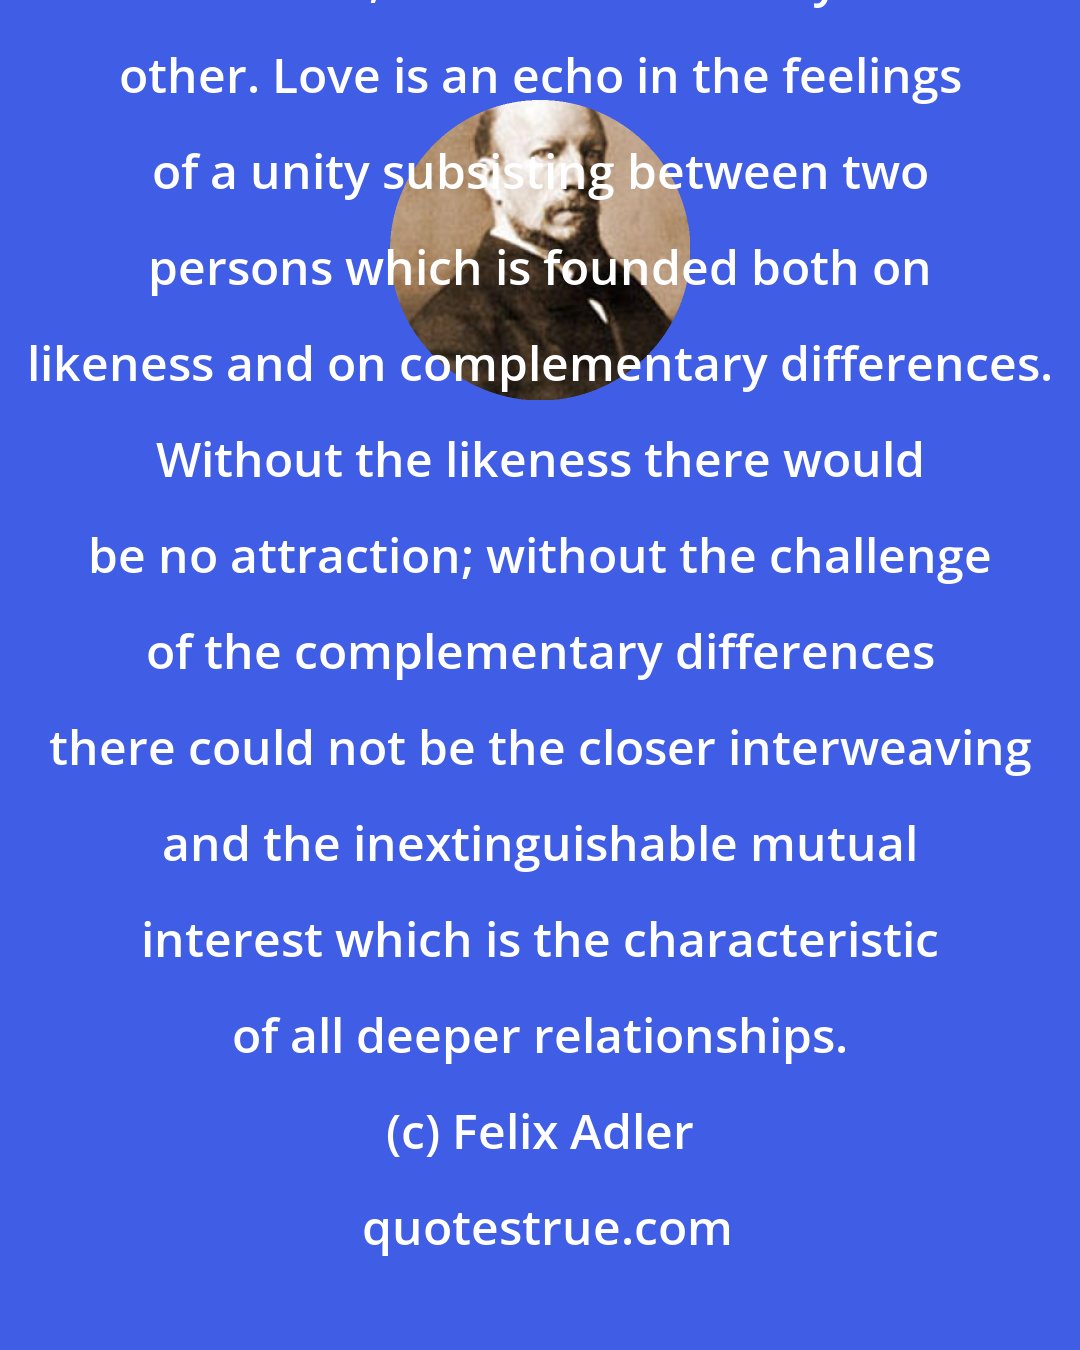 Felix Adler: Love is the expansion of two natures in such fashion that each include the other, each is enriched by the other. Love is an echo in the feelings of a unity subsisting between two persons which is founded both on likeness and on complementary differences. Without the likeness there would be no attraction; without the challenge of the complementary differences there could not be the closer interweaving and the inextinguishable mutual interest which is the characteristic of all deeper relationships.